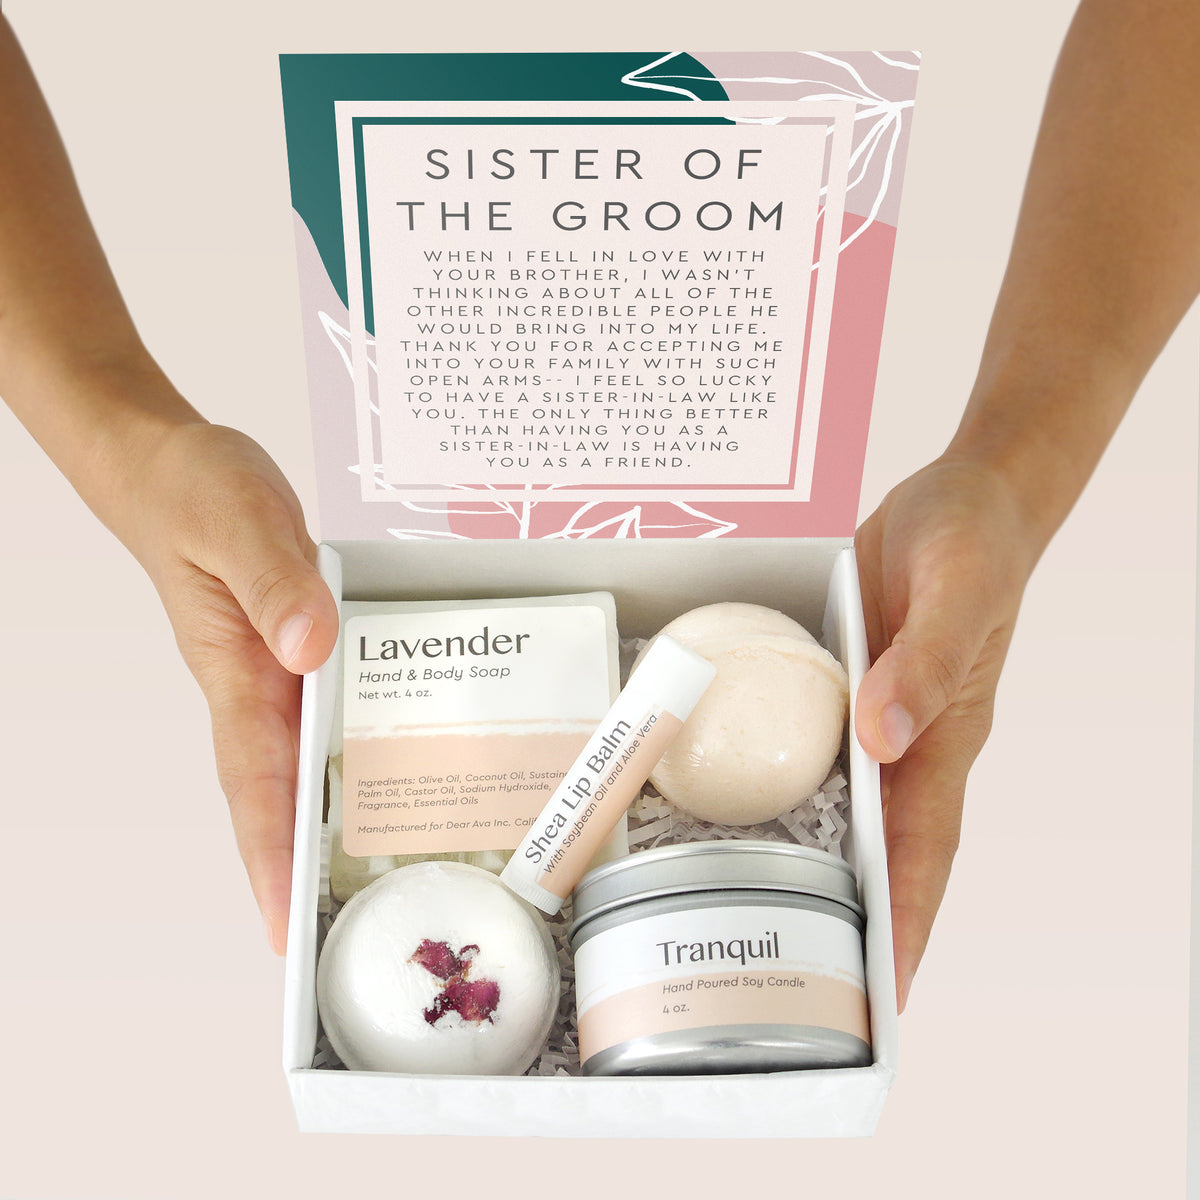 Sister of the Groom Spa Gift Box